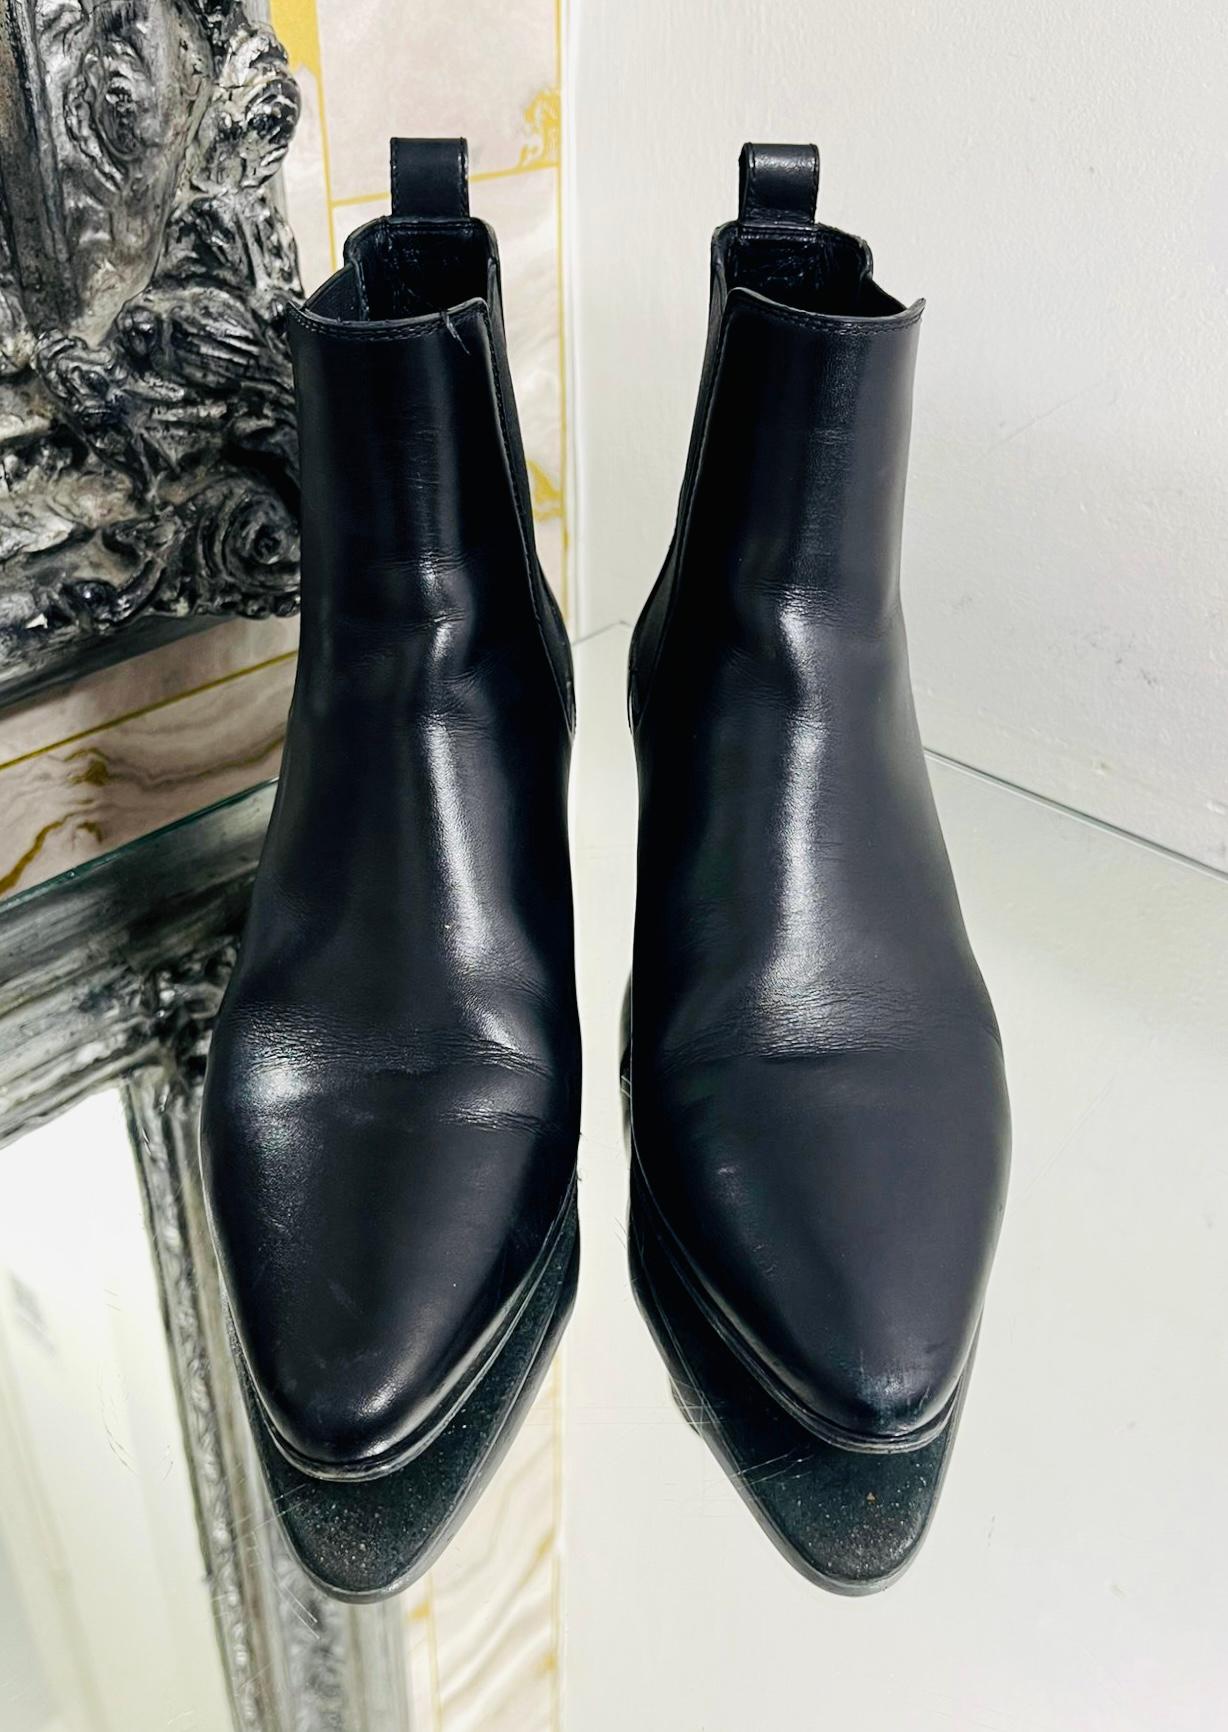 Saint Laurent Vassili Leather Chelsea Ankle Boots

Black slip-on boots designed with pointed toe and stacked heel.

Featuring elasticated side inserts, leather lining, insoles and soles. Rrp £930

Size – 35.5

Condition – Fair (Wear to the heel and